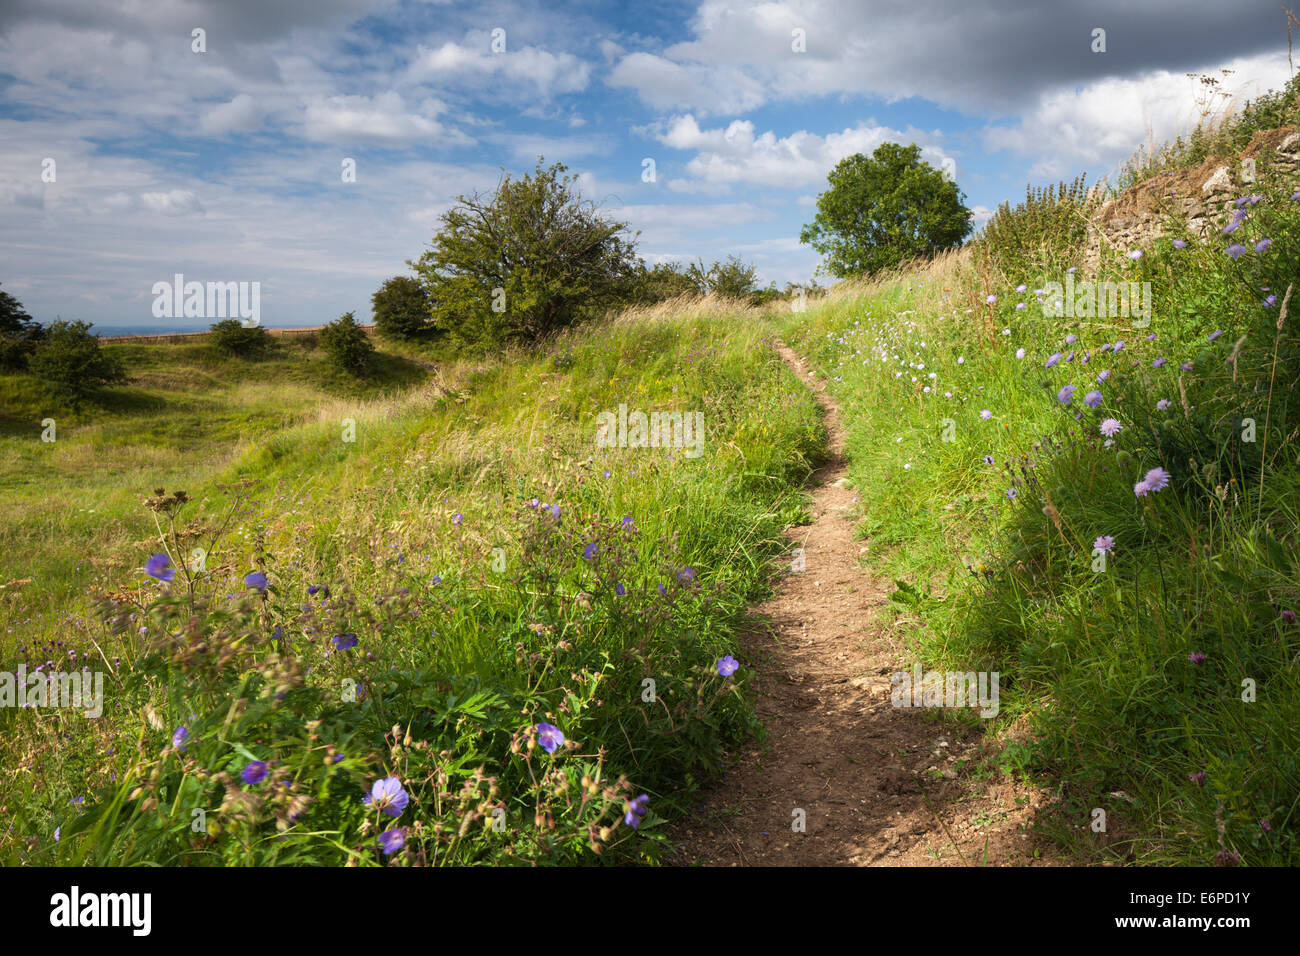 A narrow summery path winds its way among some old quarry workings and wildflowers near the Cotswolds village of Snowshill, Gloucestershire, England. Stock Photo